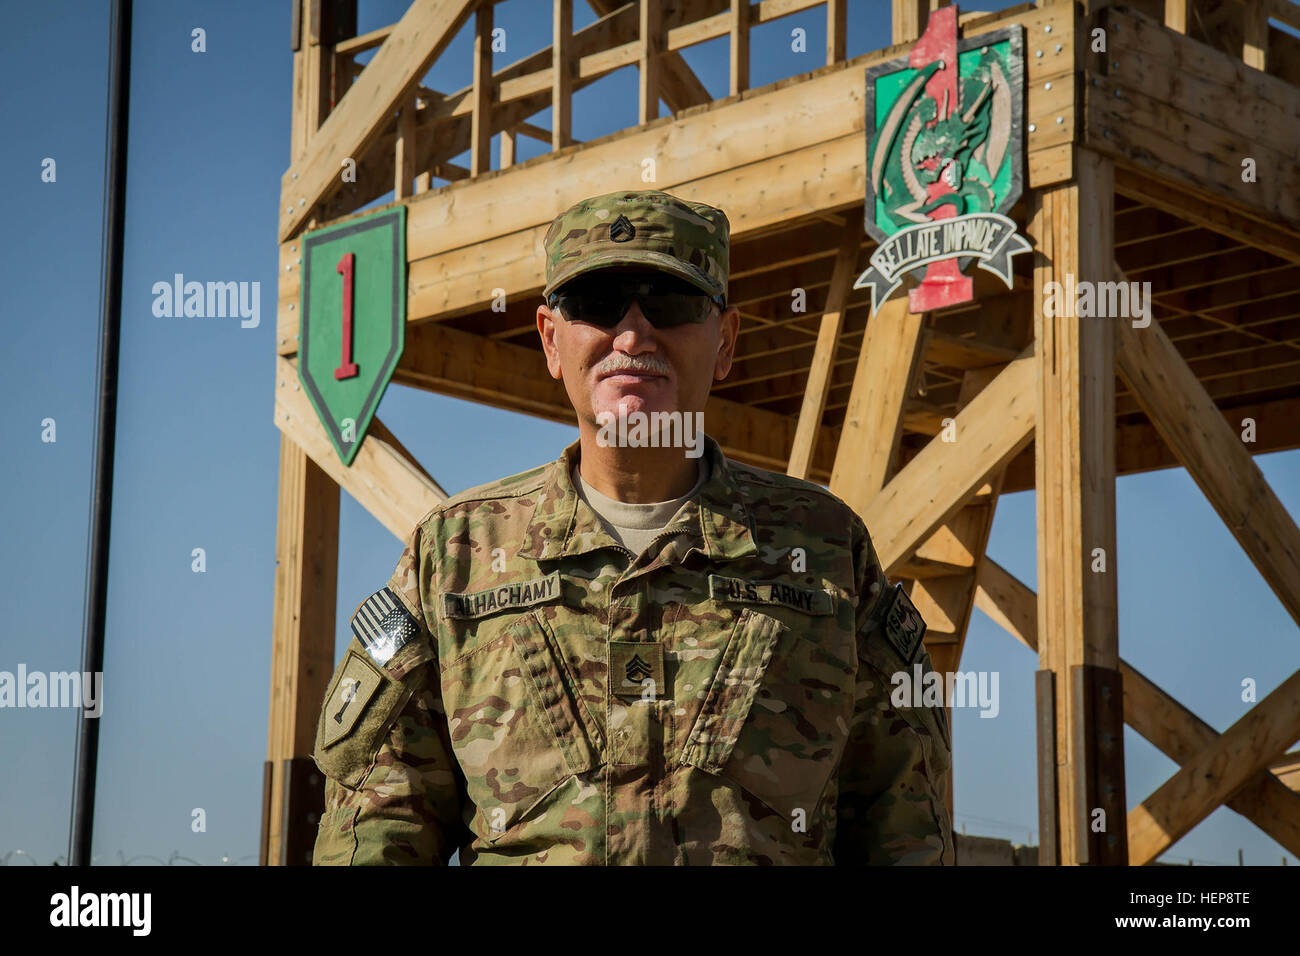 U.S. Army Staff Sgt. Reyadh Alhachamy, a human intelligence collector assigned Company B, 4th Brigade Special Troops Battalion, 4th Infantry Brigade Combat Team, 1st Infantry Division, at Forward Operating Base Sharana, Jan. 10, 2012. Alhachamy uses his experience as a linguist to use one of 15 dialects of the Arabic language to collect information on enemy forces in the local villages. (U.S. Army photo by Sgt. Gene Arnold, Task Force 4-1 PAO) Former Iraqi Republican Guard soldier serves as US soldier in Afghanistan 812635 Stock Photo